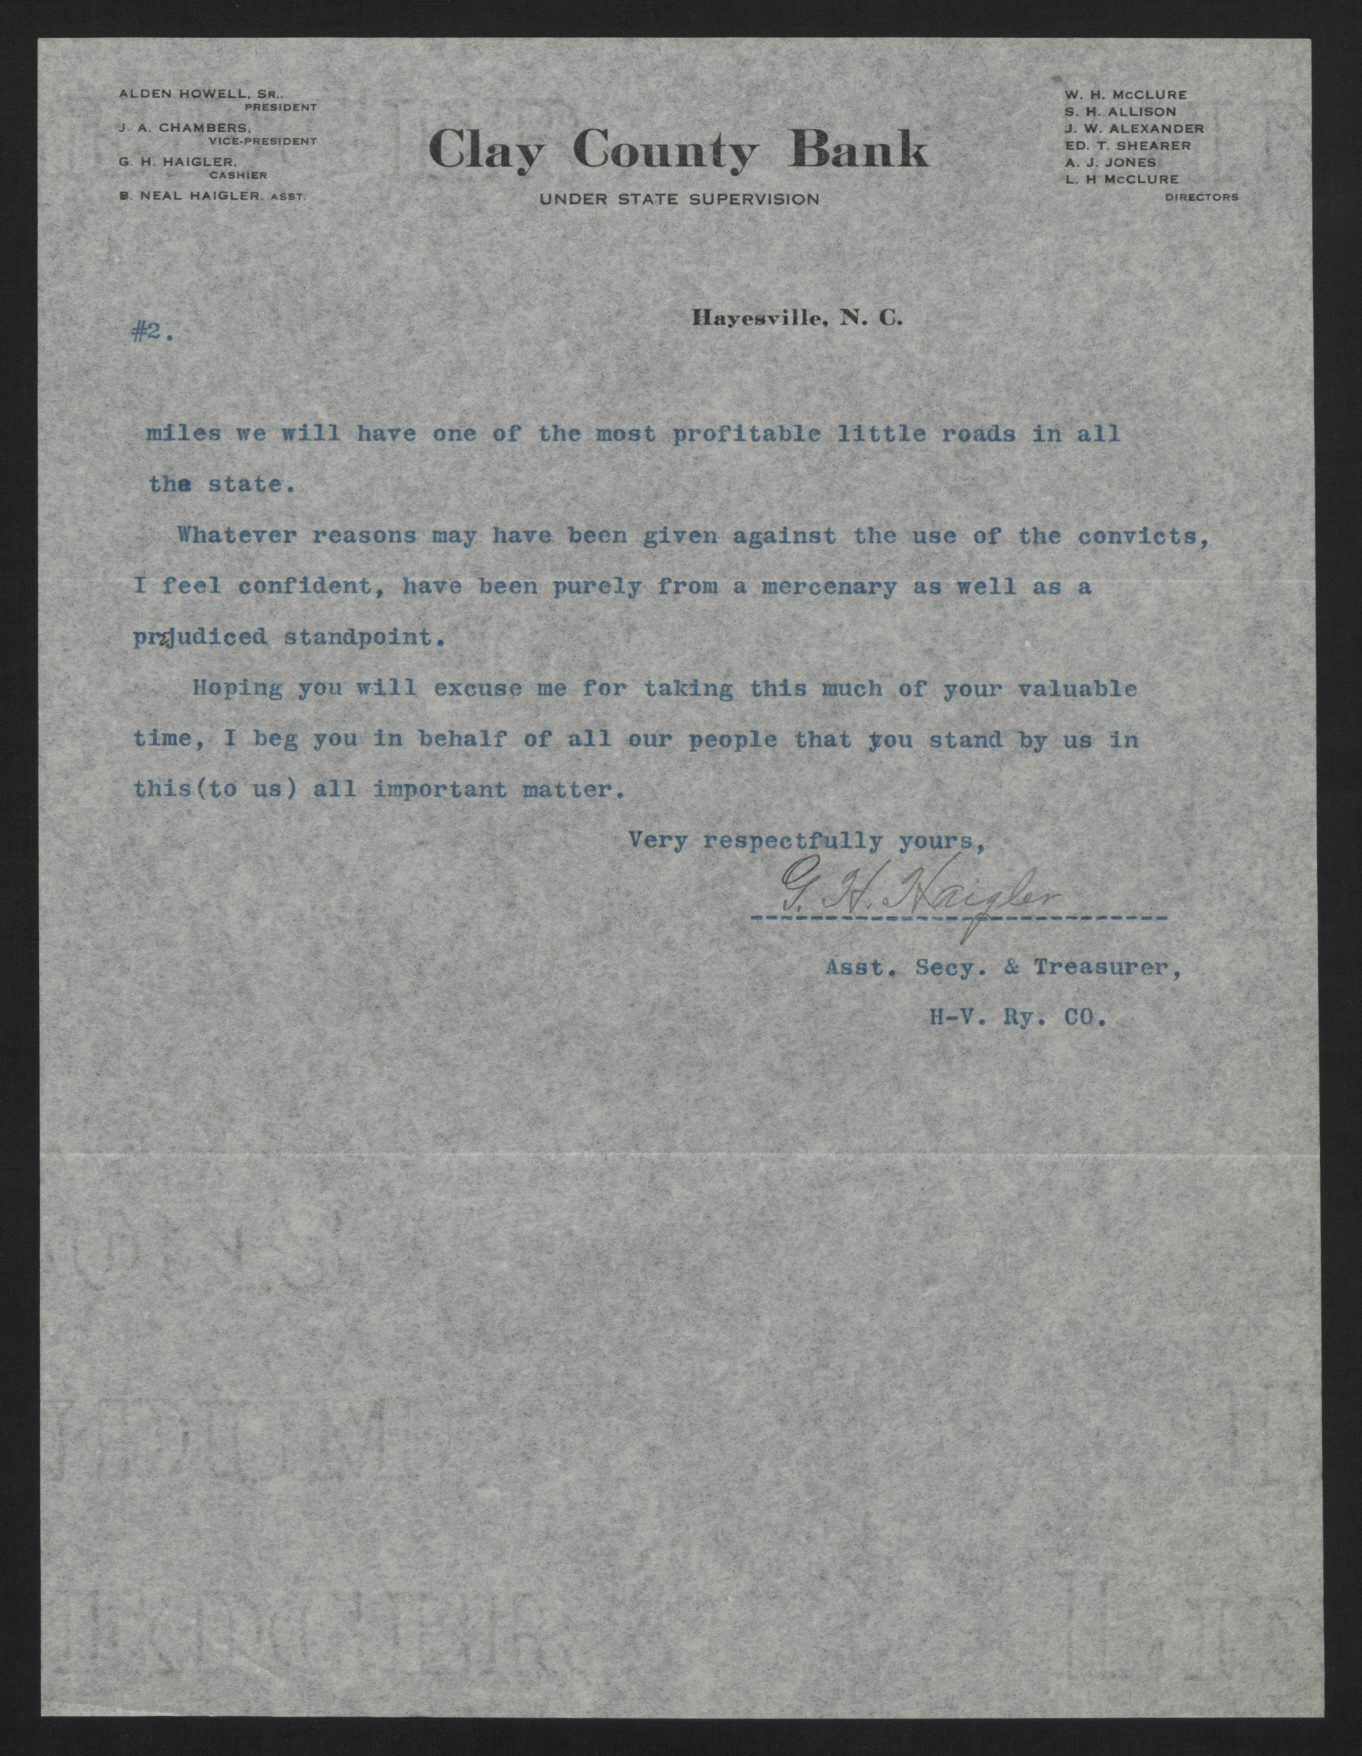 Letter from Haigler to Craig, June 23, 1915, page 2